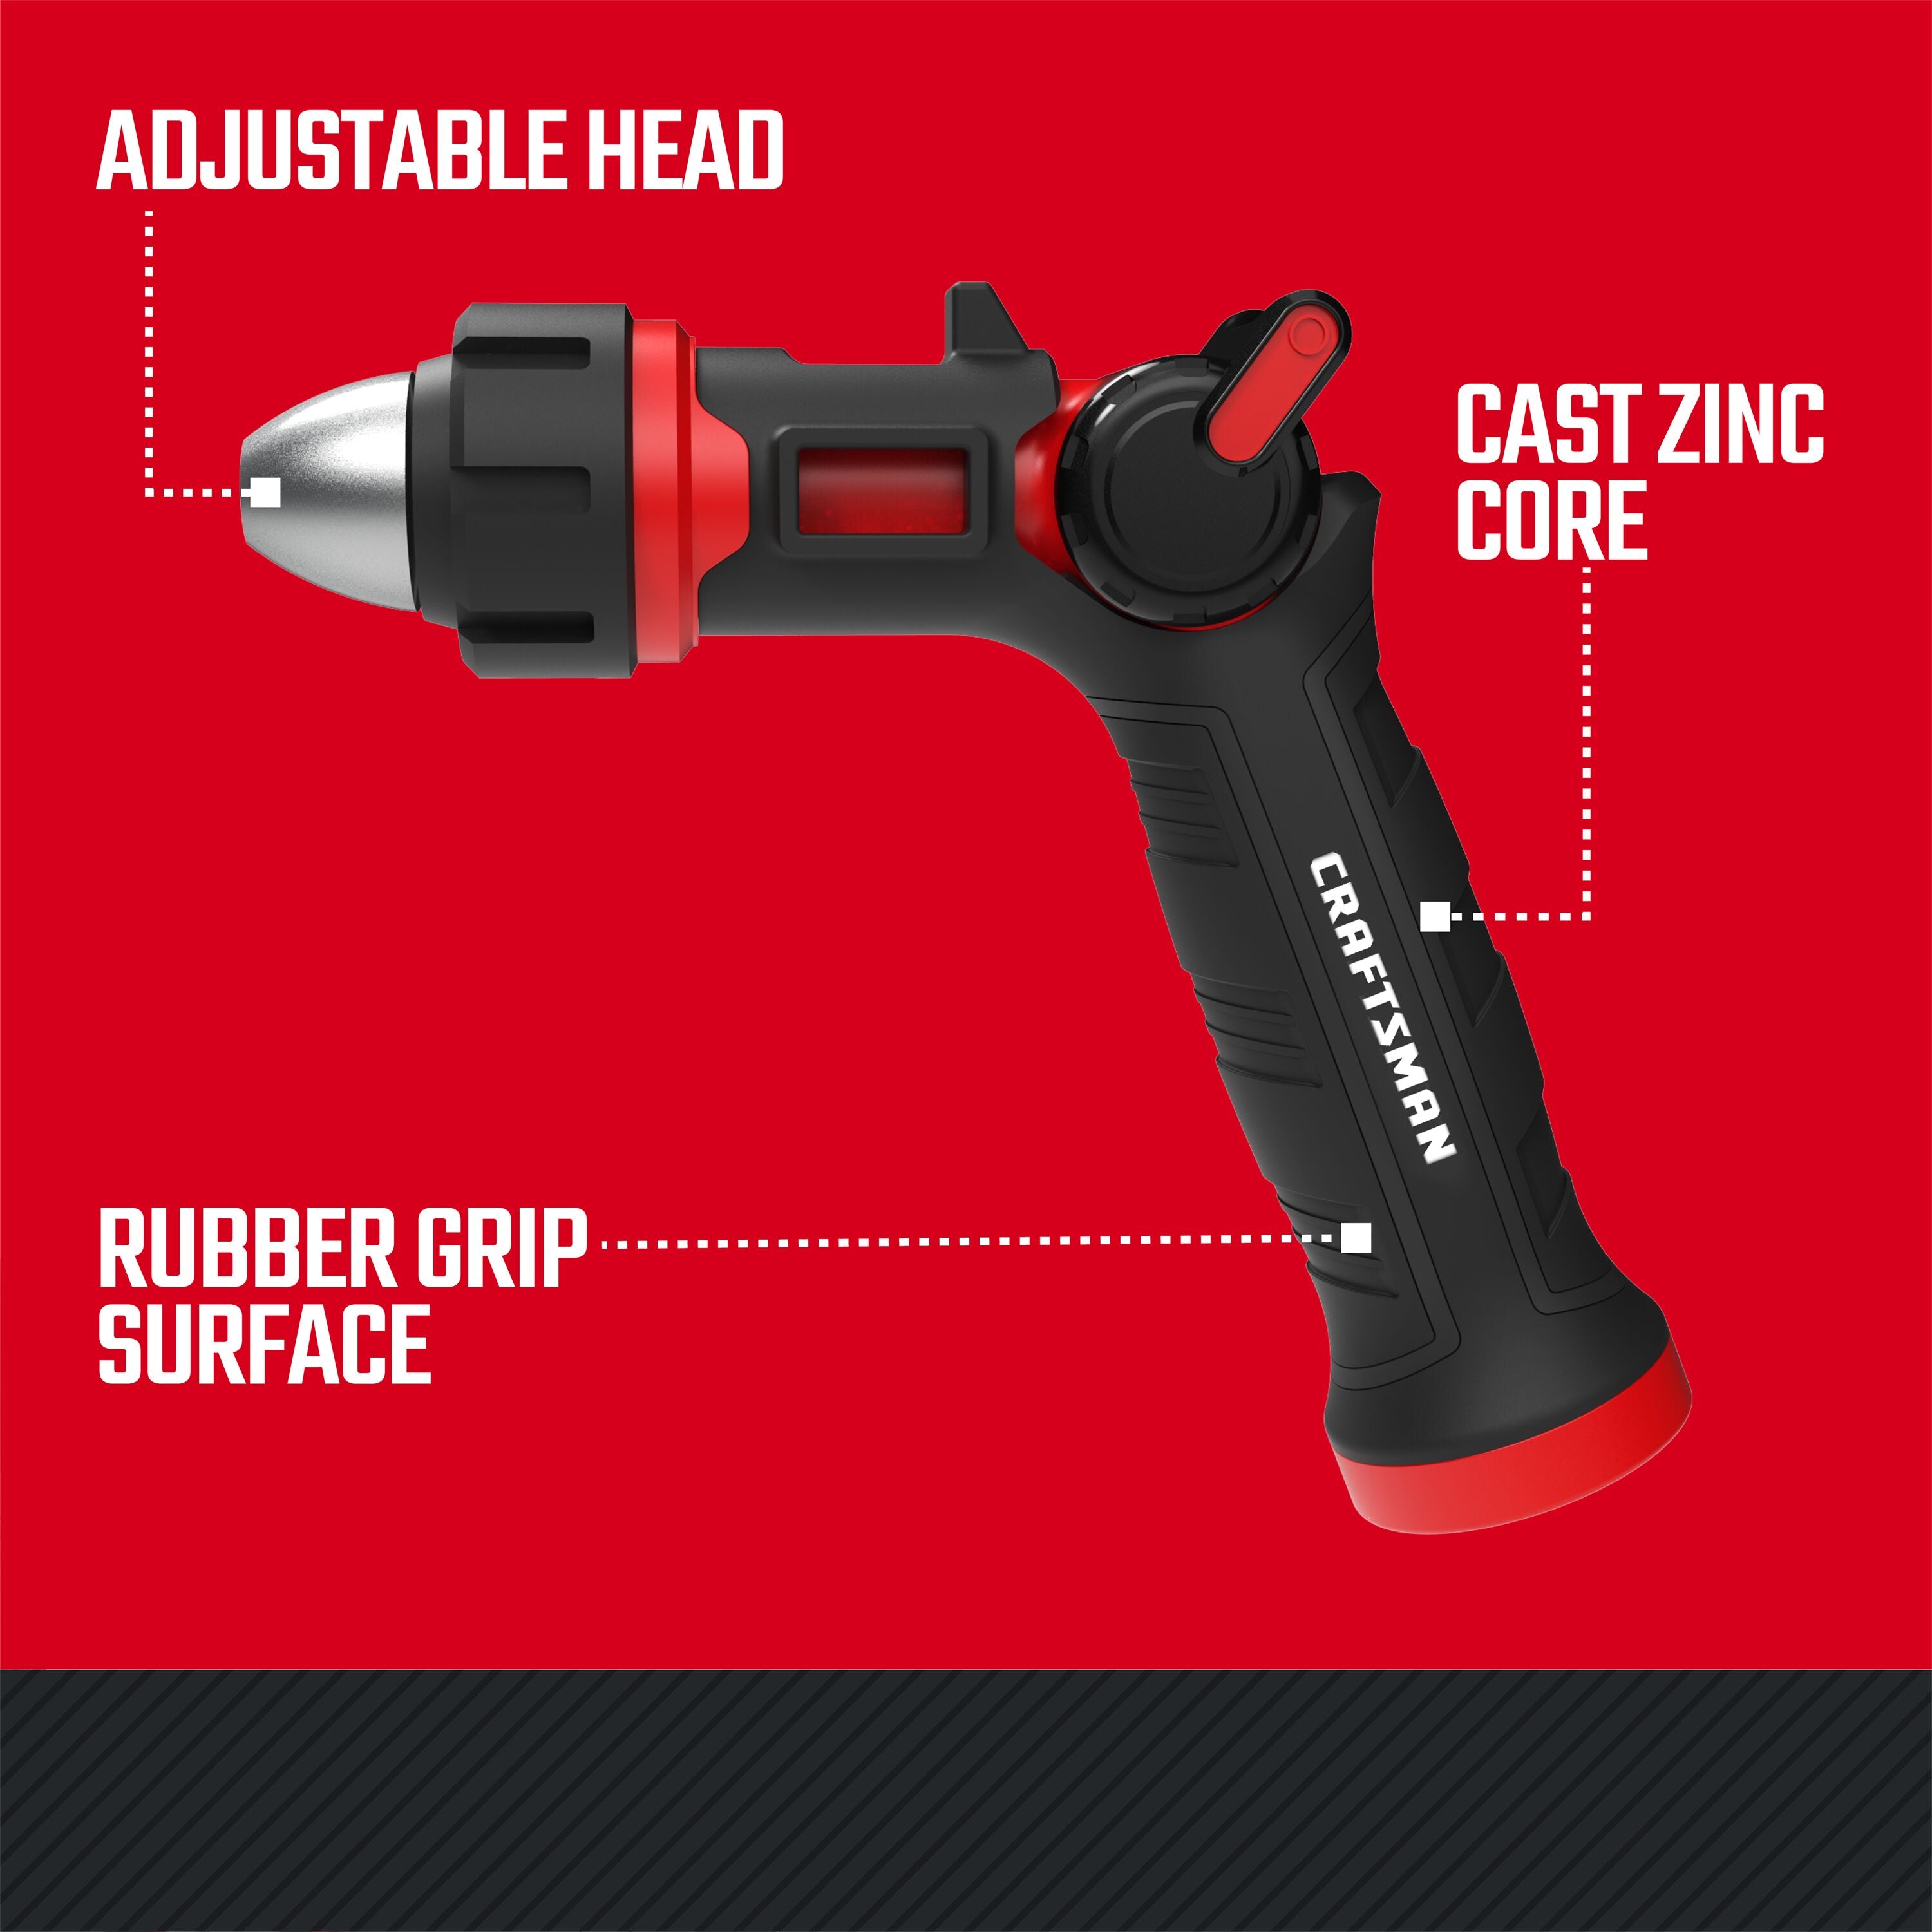 Craftsman ultimate adjustable water nozzle with thumb control. Featuring cast zinc core and rubber grip surface graphic